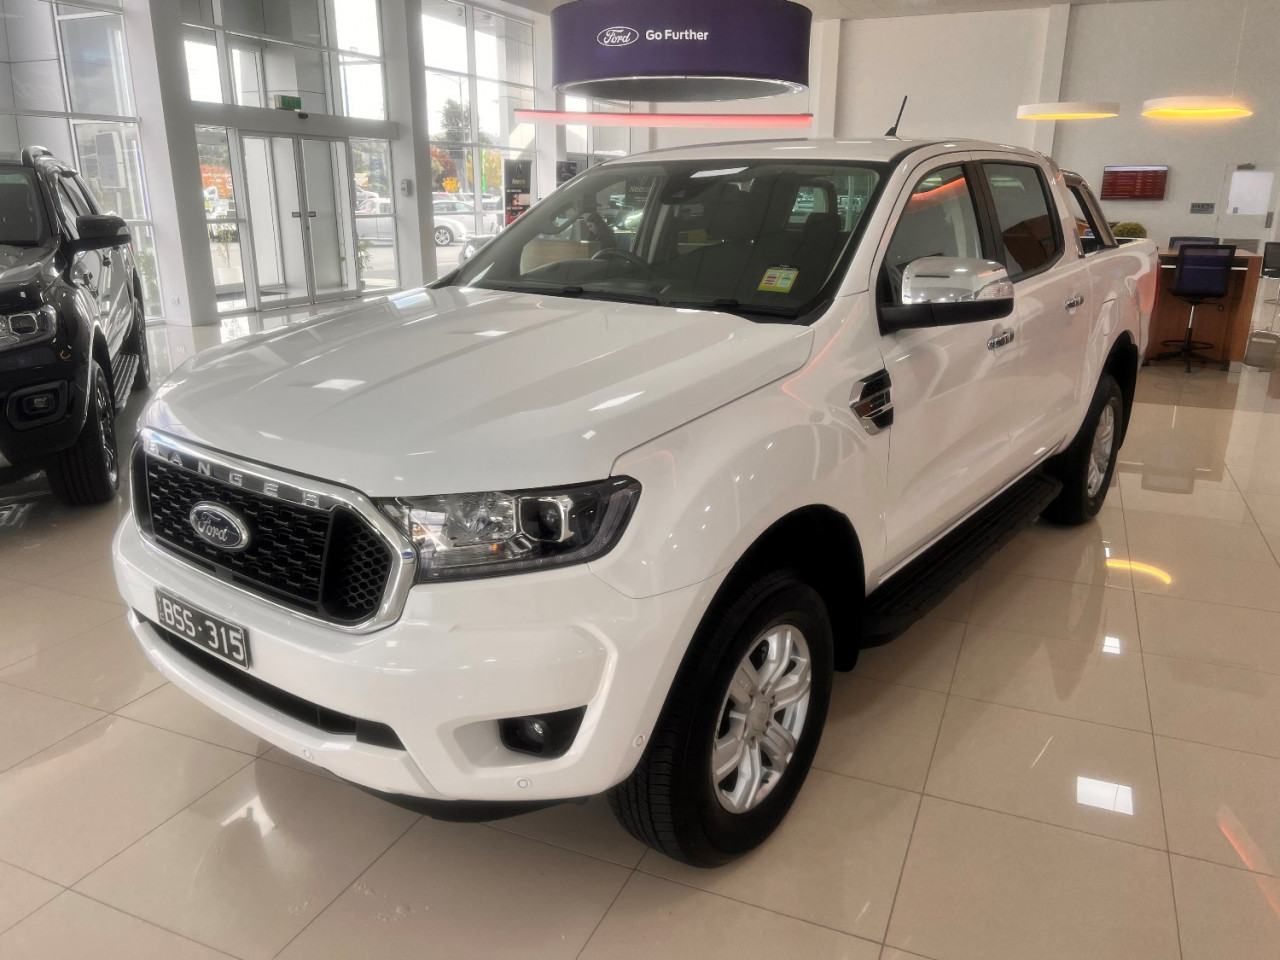 2021 MY21.75 Ford Ranger PX MkIII XLT Hi-Rider Double Cab Ute Image 1